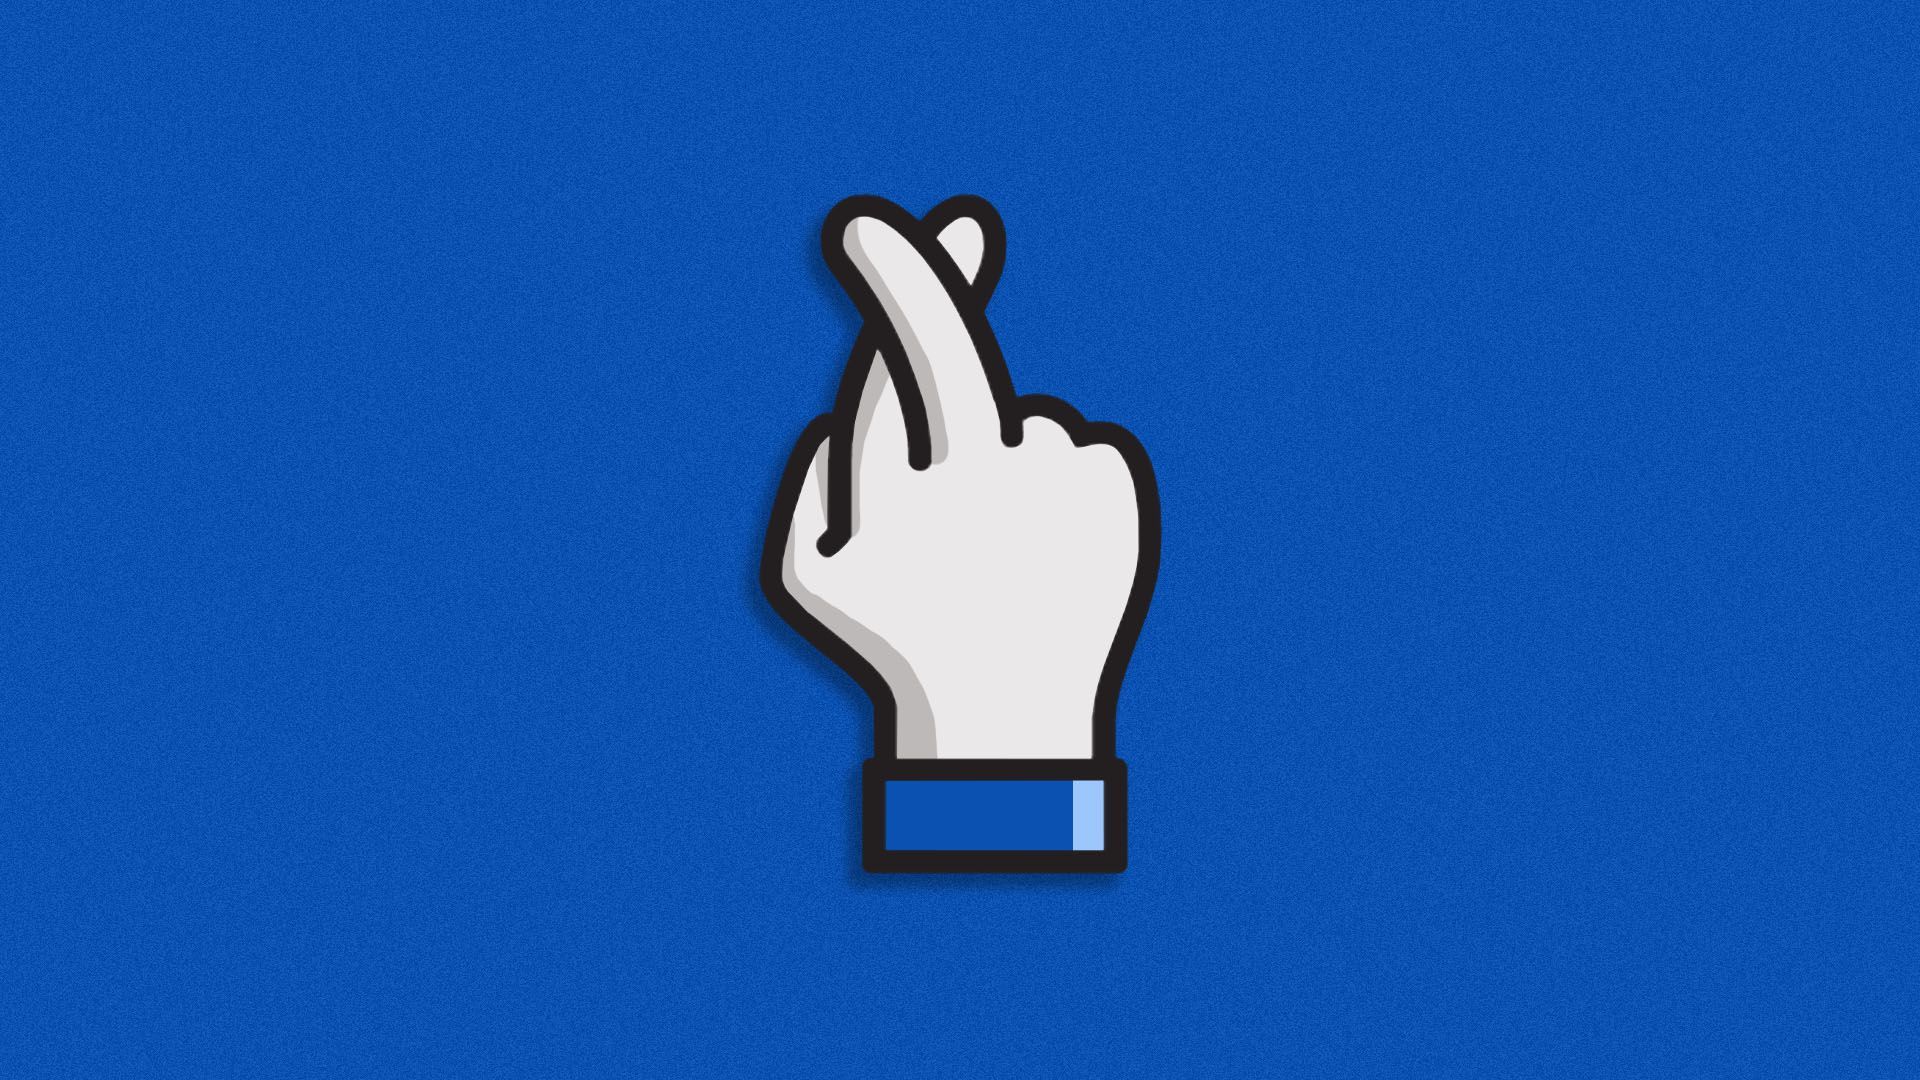 The Facebook "like" button crossing its fingers.